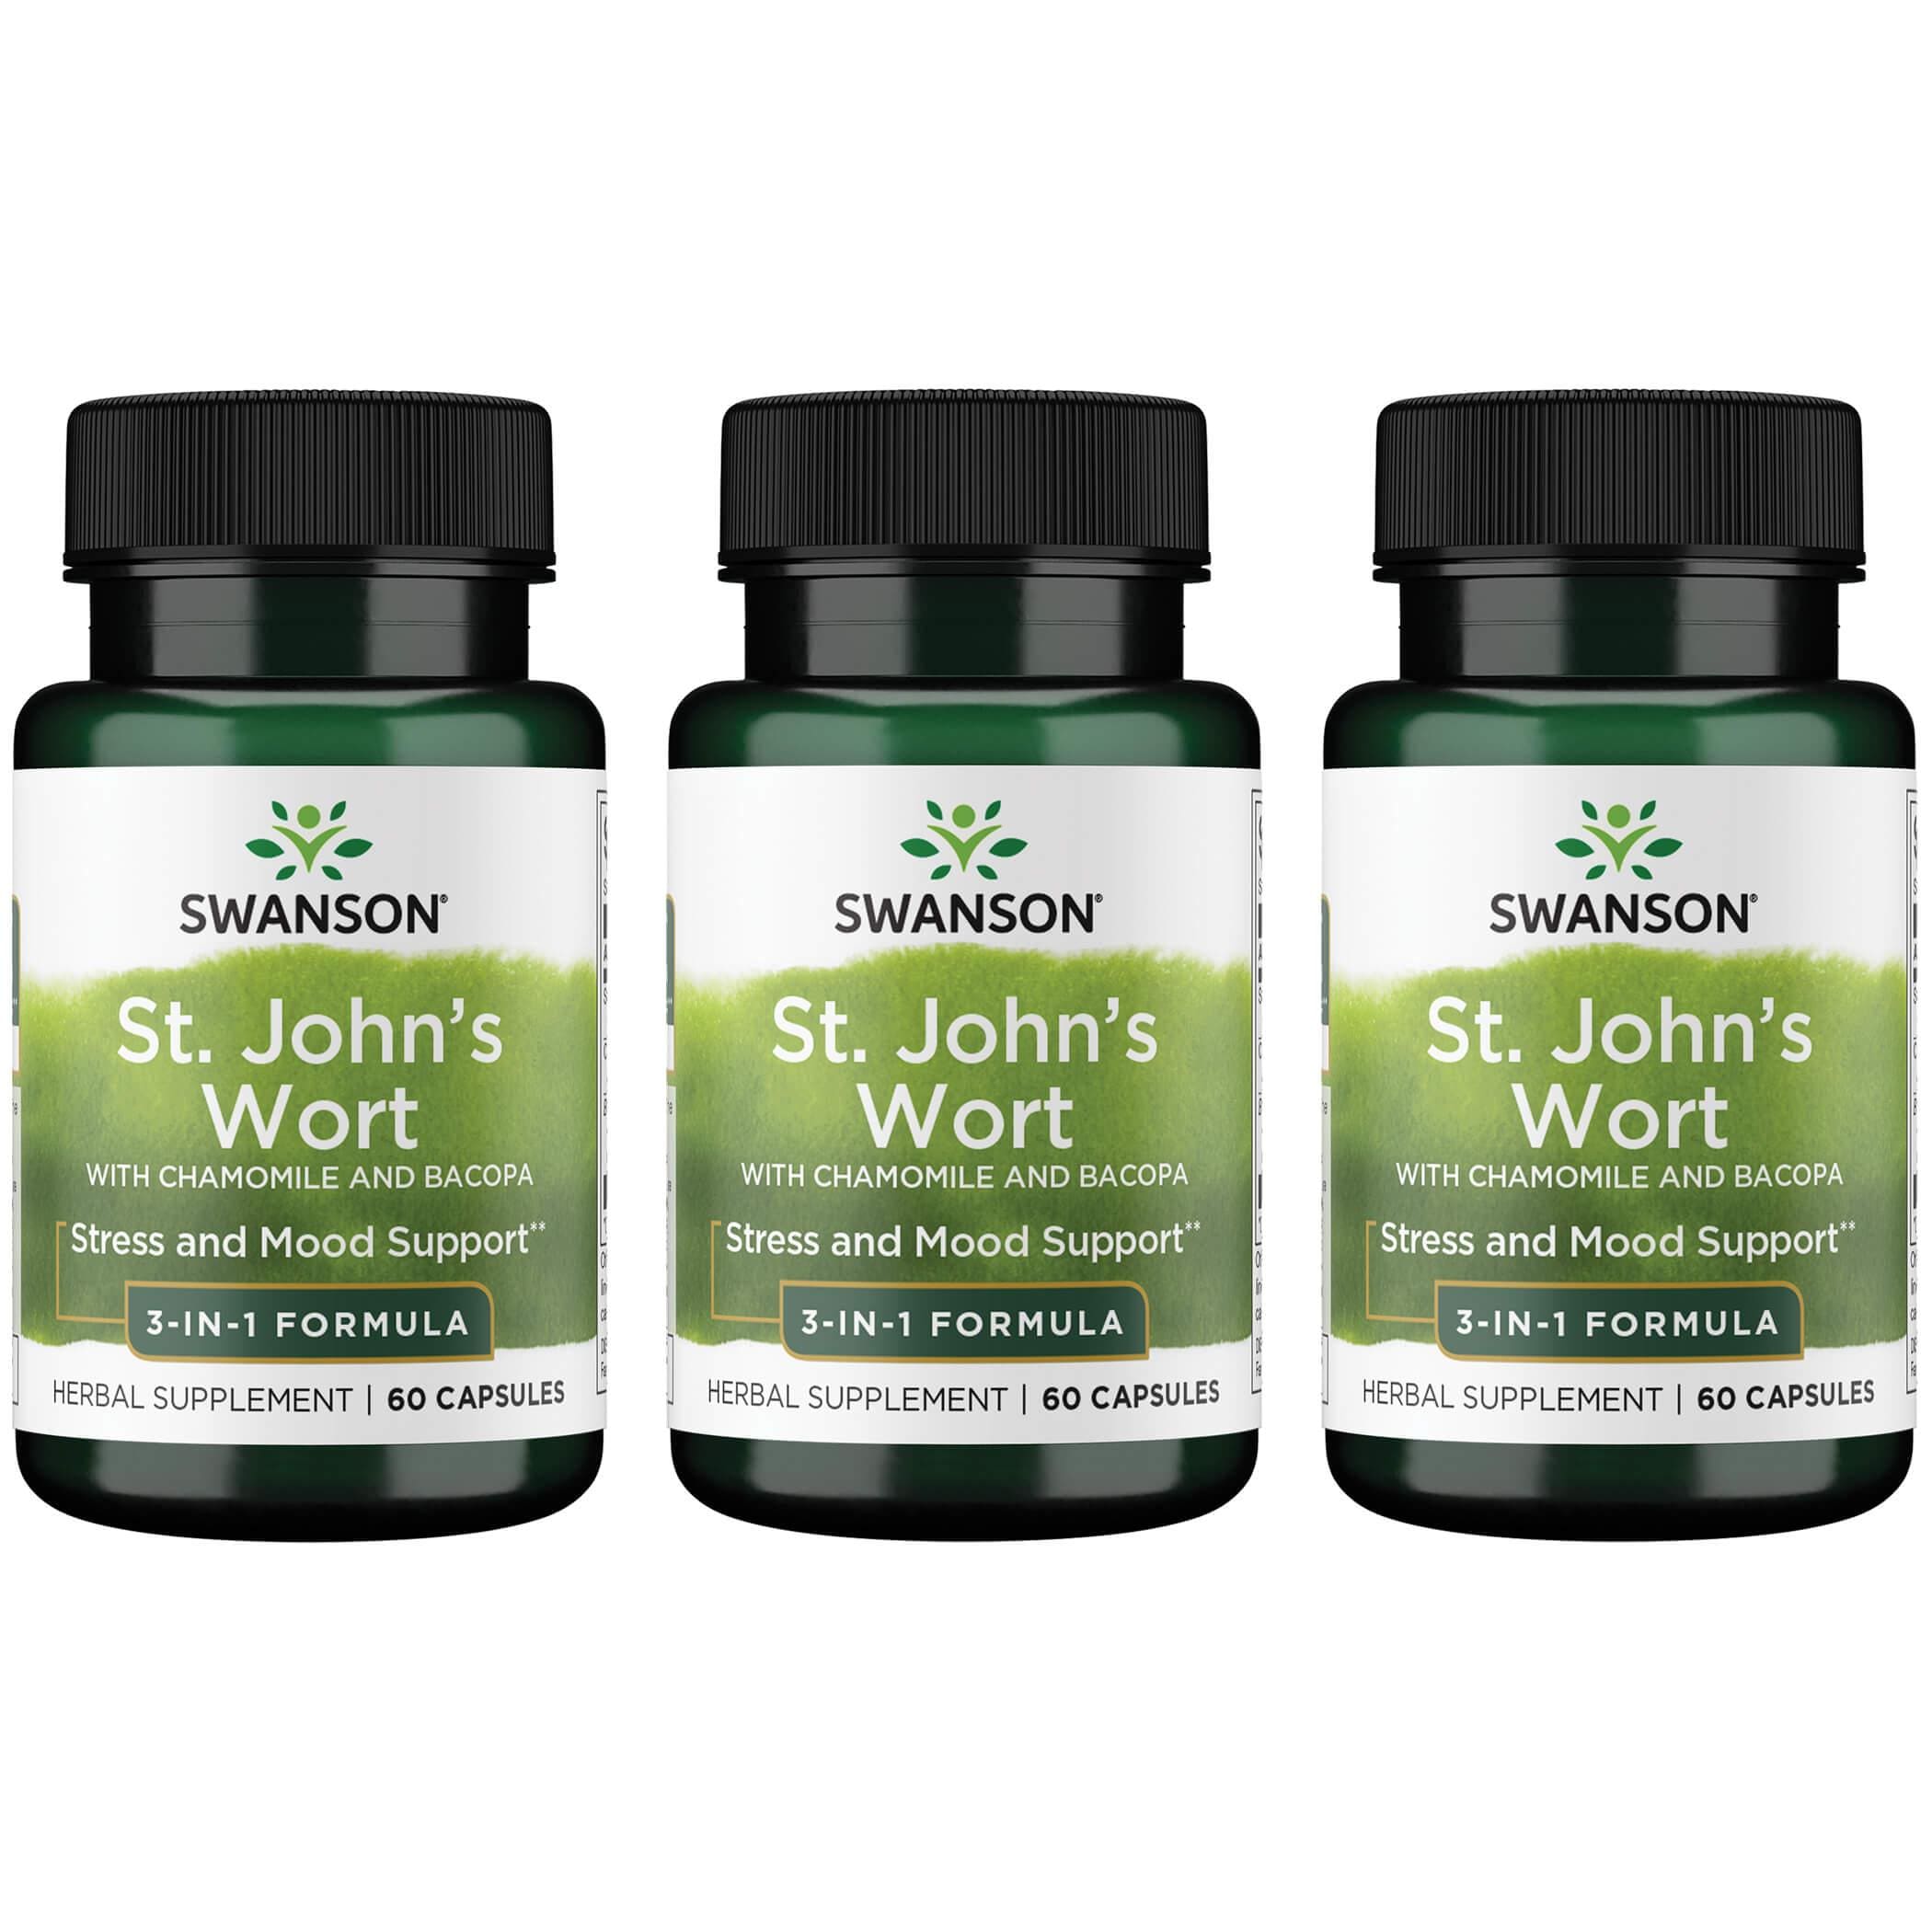 Swanson Premium St. Johns Wort with Chamomile and Bacopa - 3 in 1 Formula Pack Vitamin 60 Caps